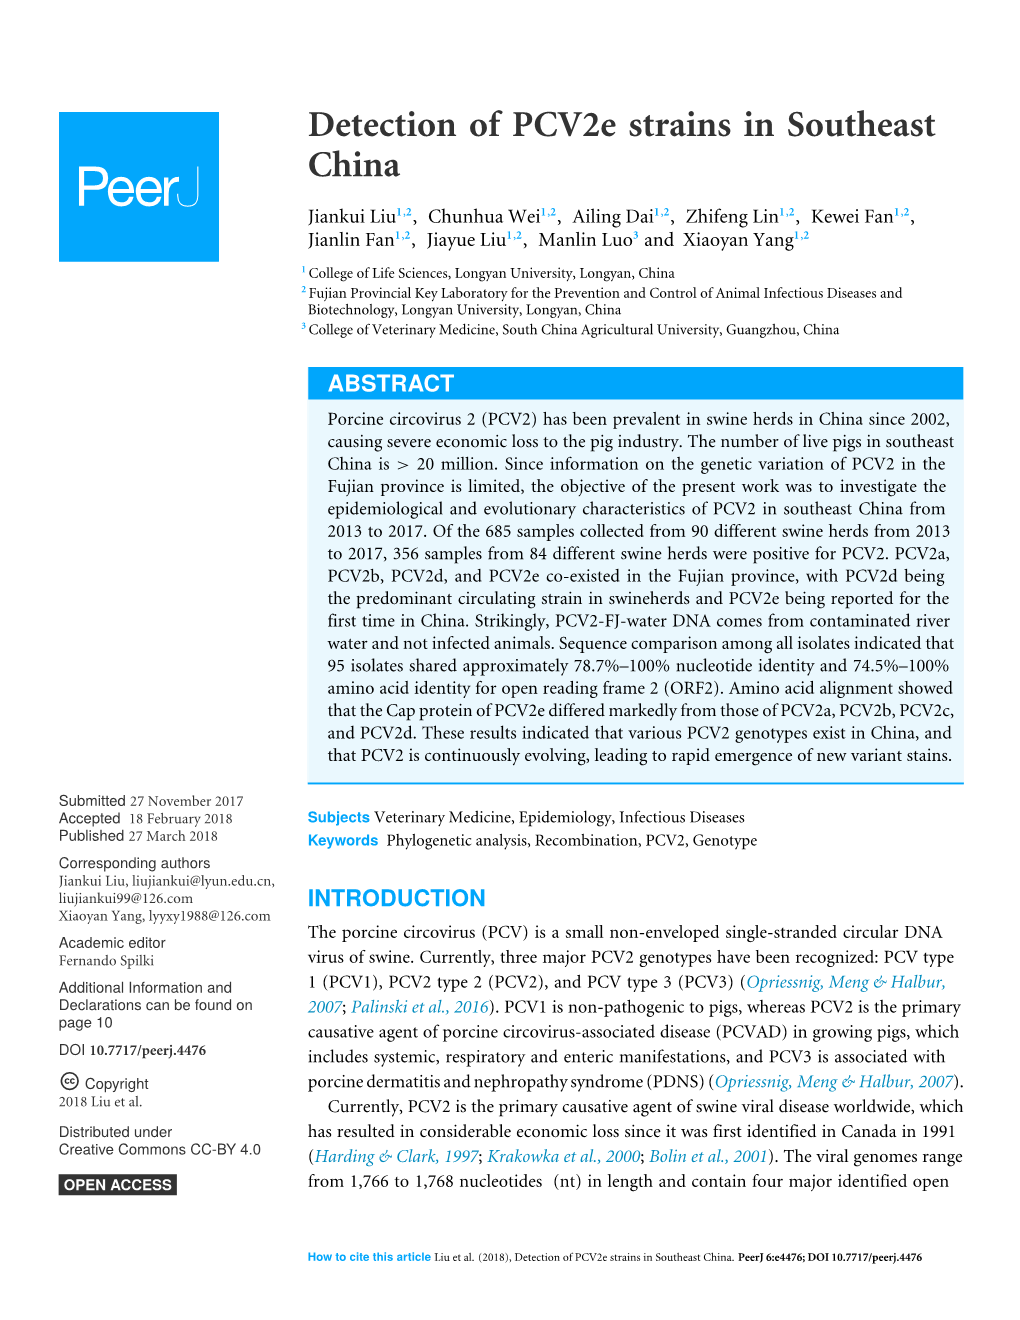 Detection of Pcv2e Strains in Southeast China